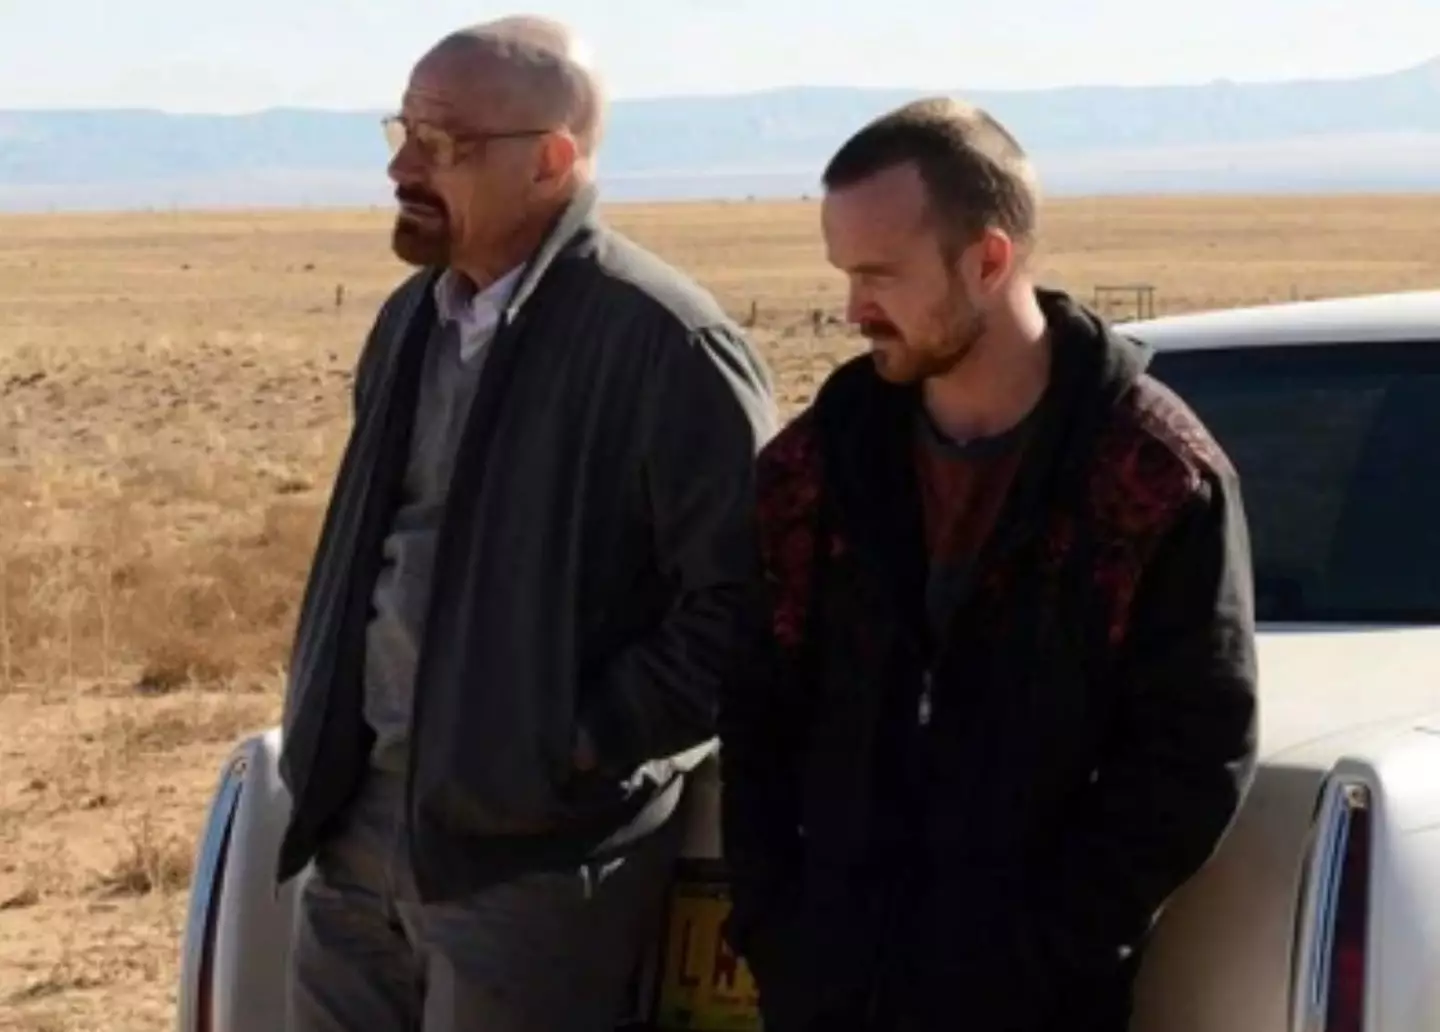 Breaking Bad stars Bryan Cranston and Aaron Paul are set to make an appearance in Better Call Saul.